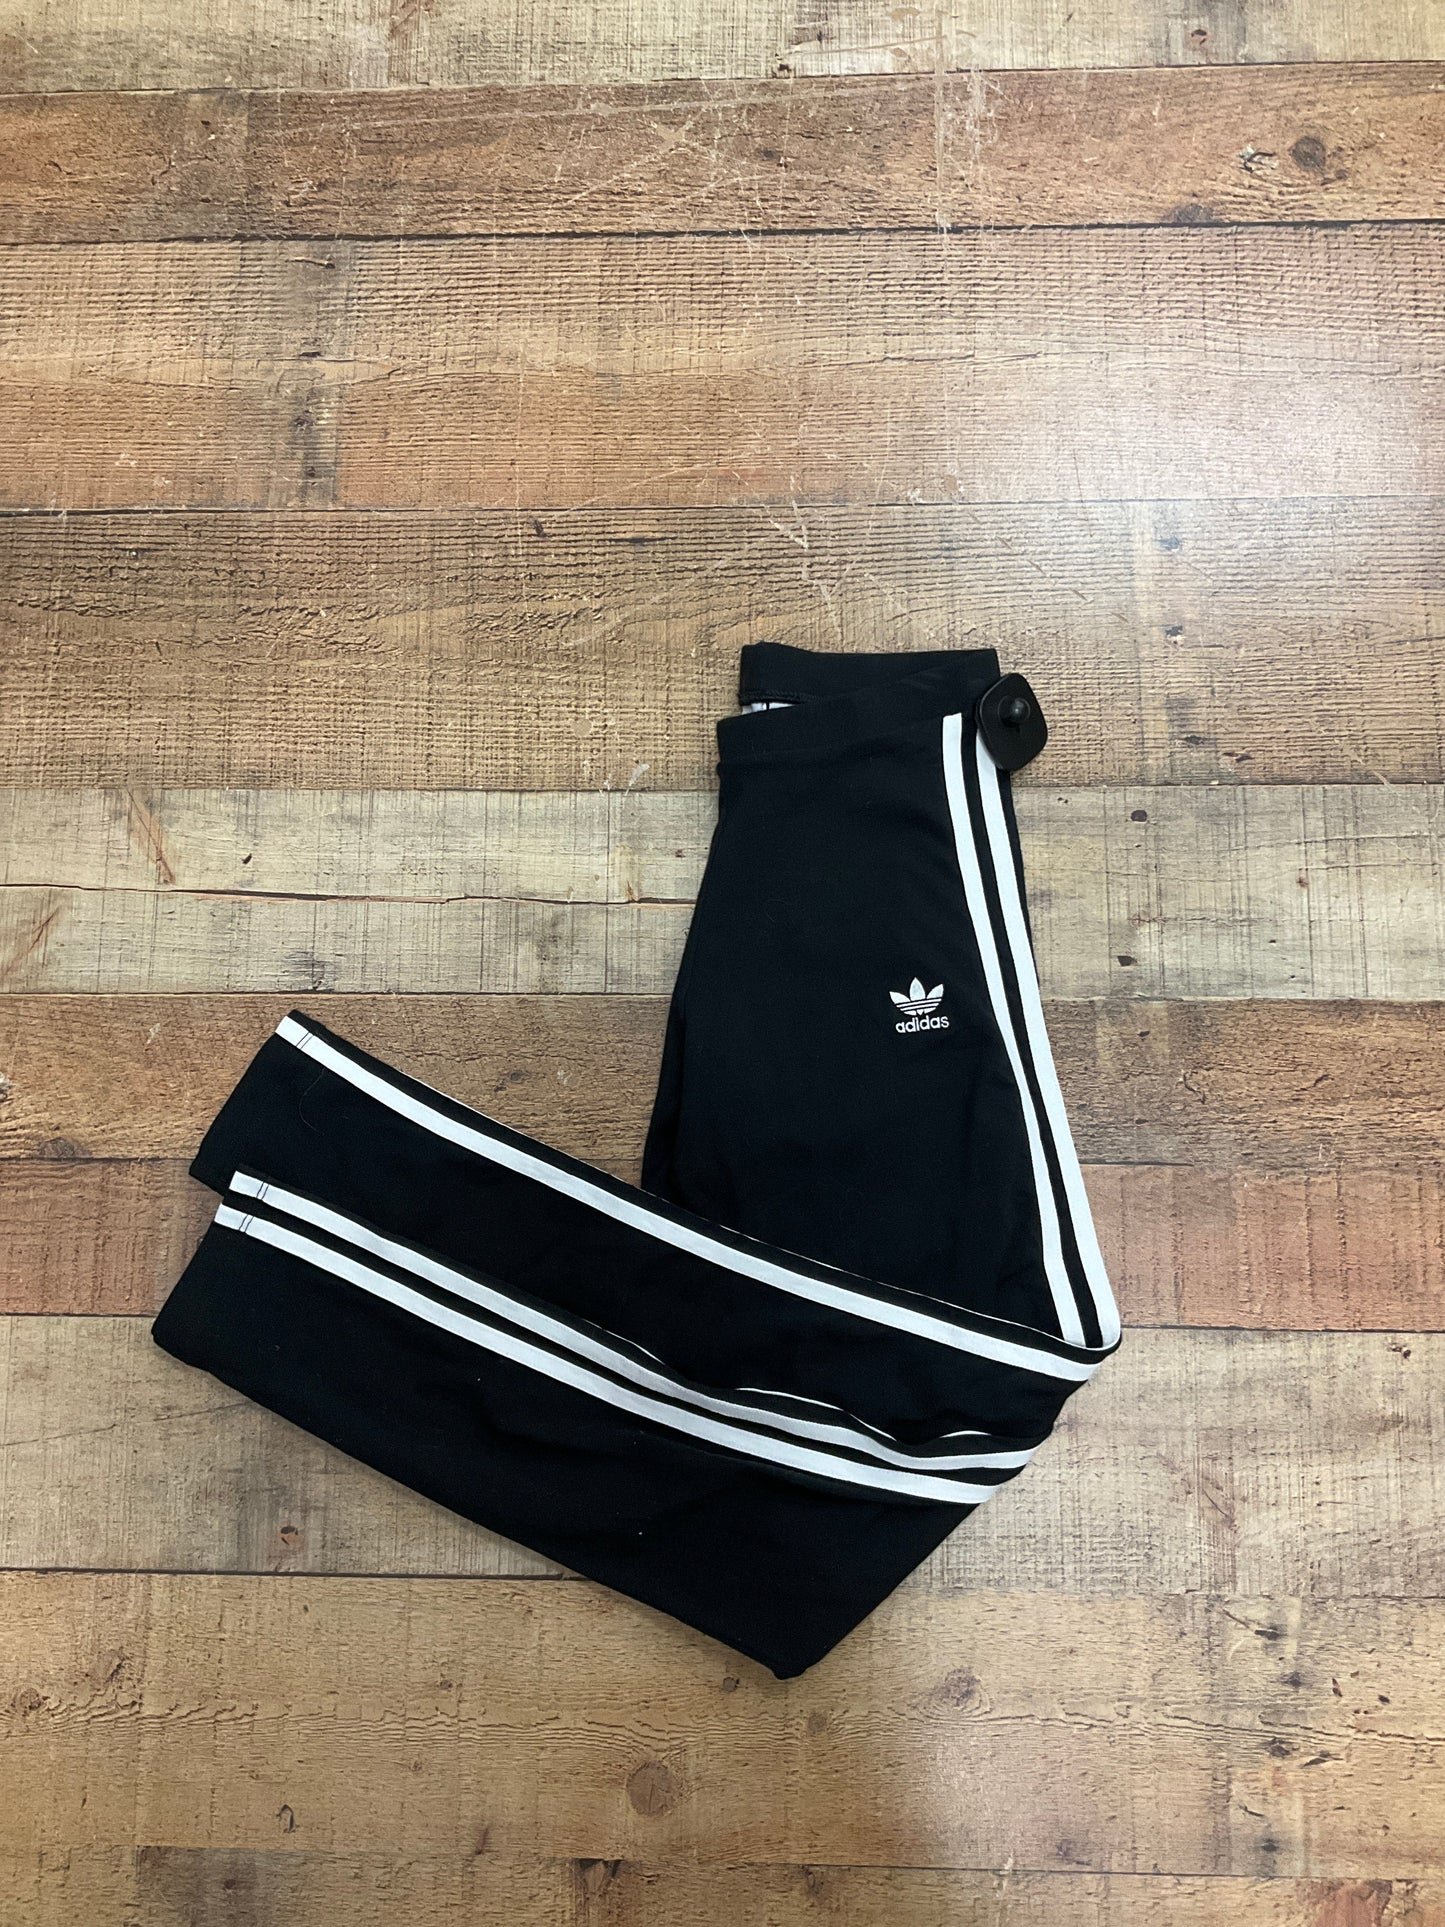 Athletic Leggings By Adidas  Size: Xs